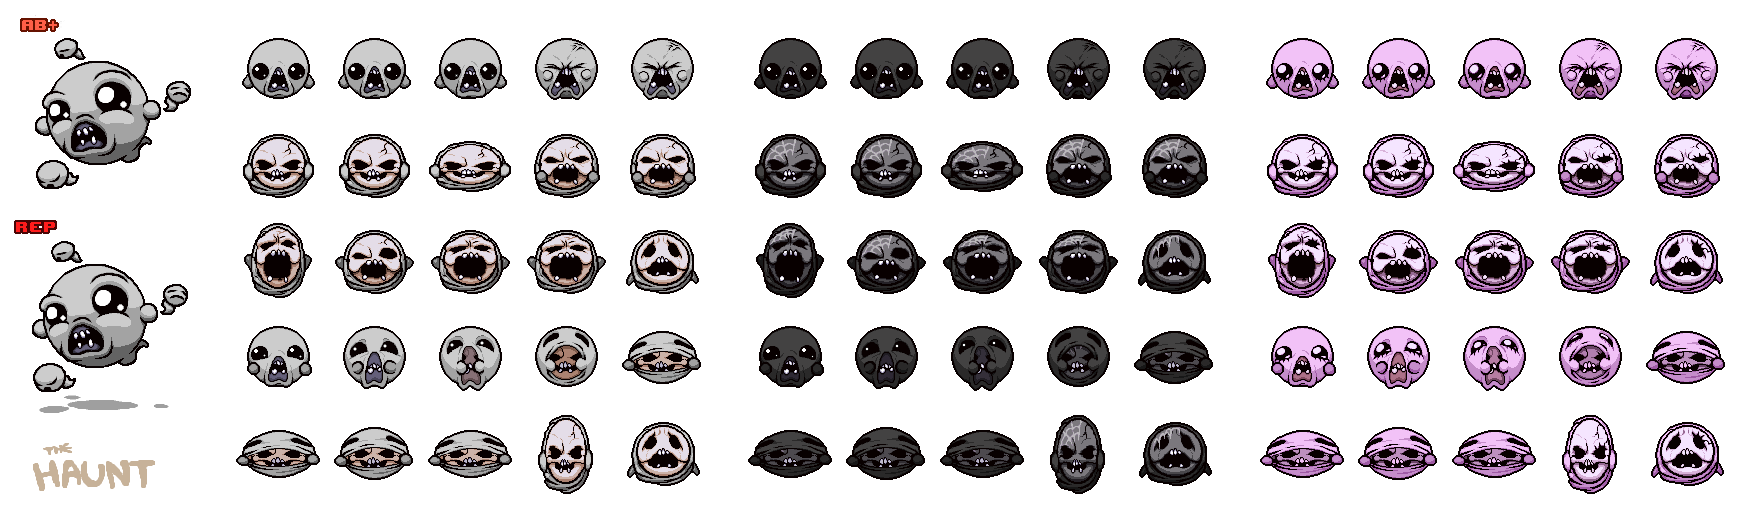 The Binding of Isaac: Rebirth - The Haunt